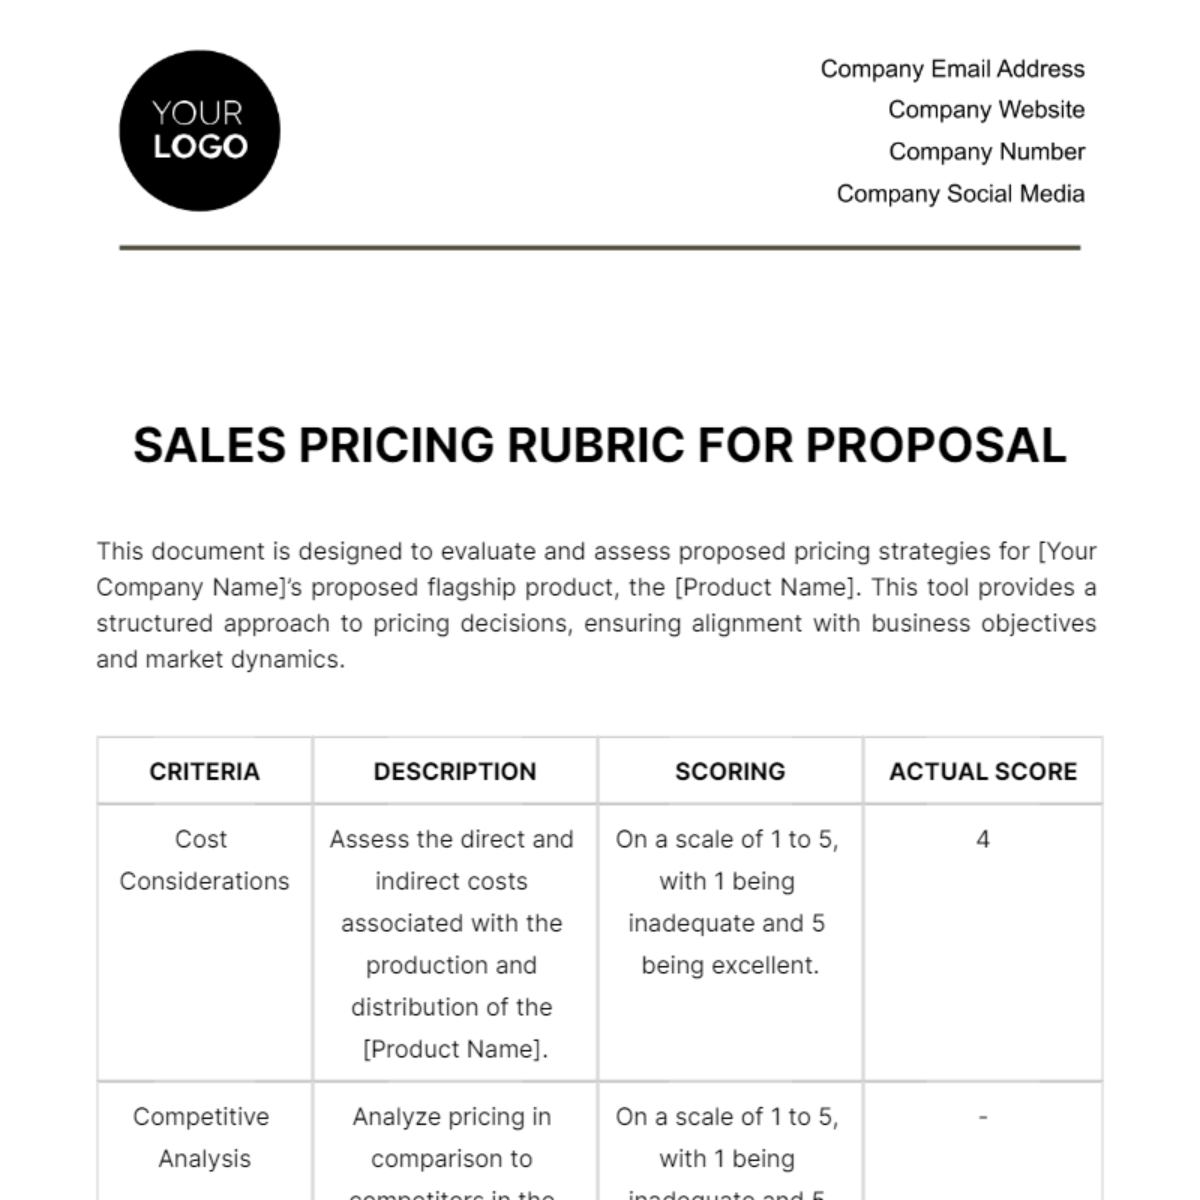 Free Sales Pricing Rubric for Proposal Template